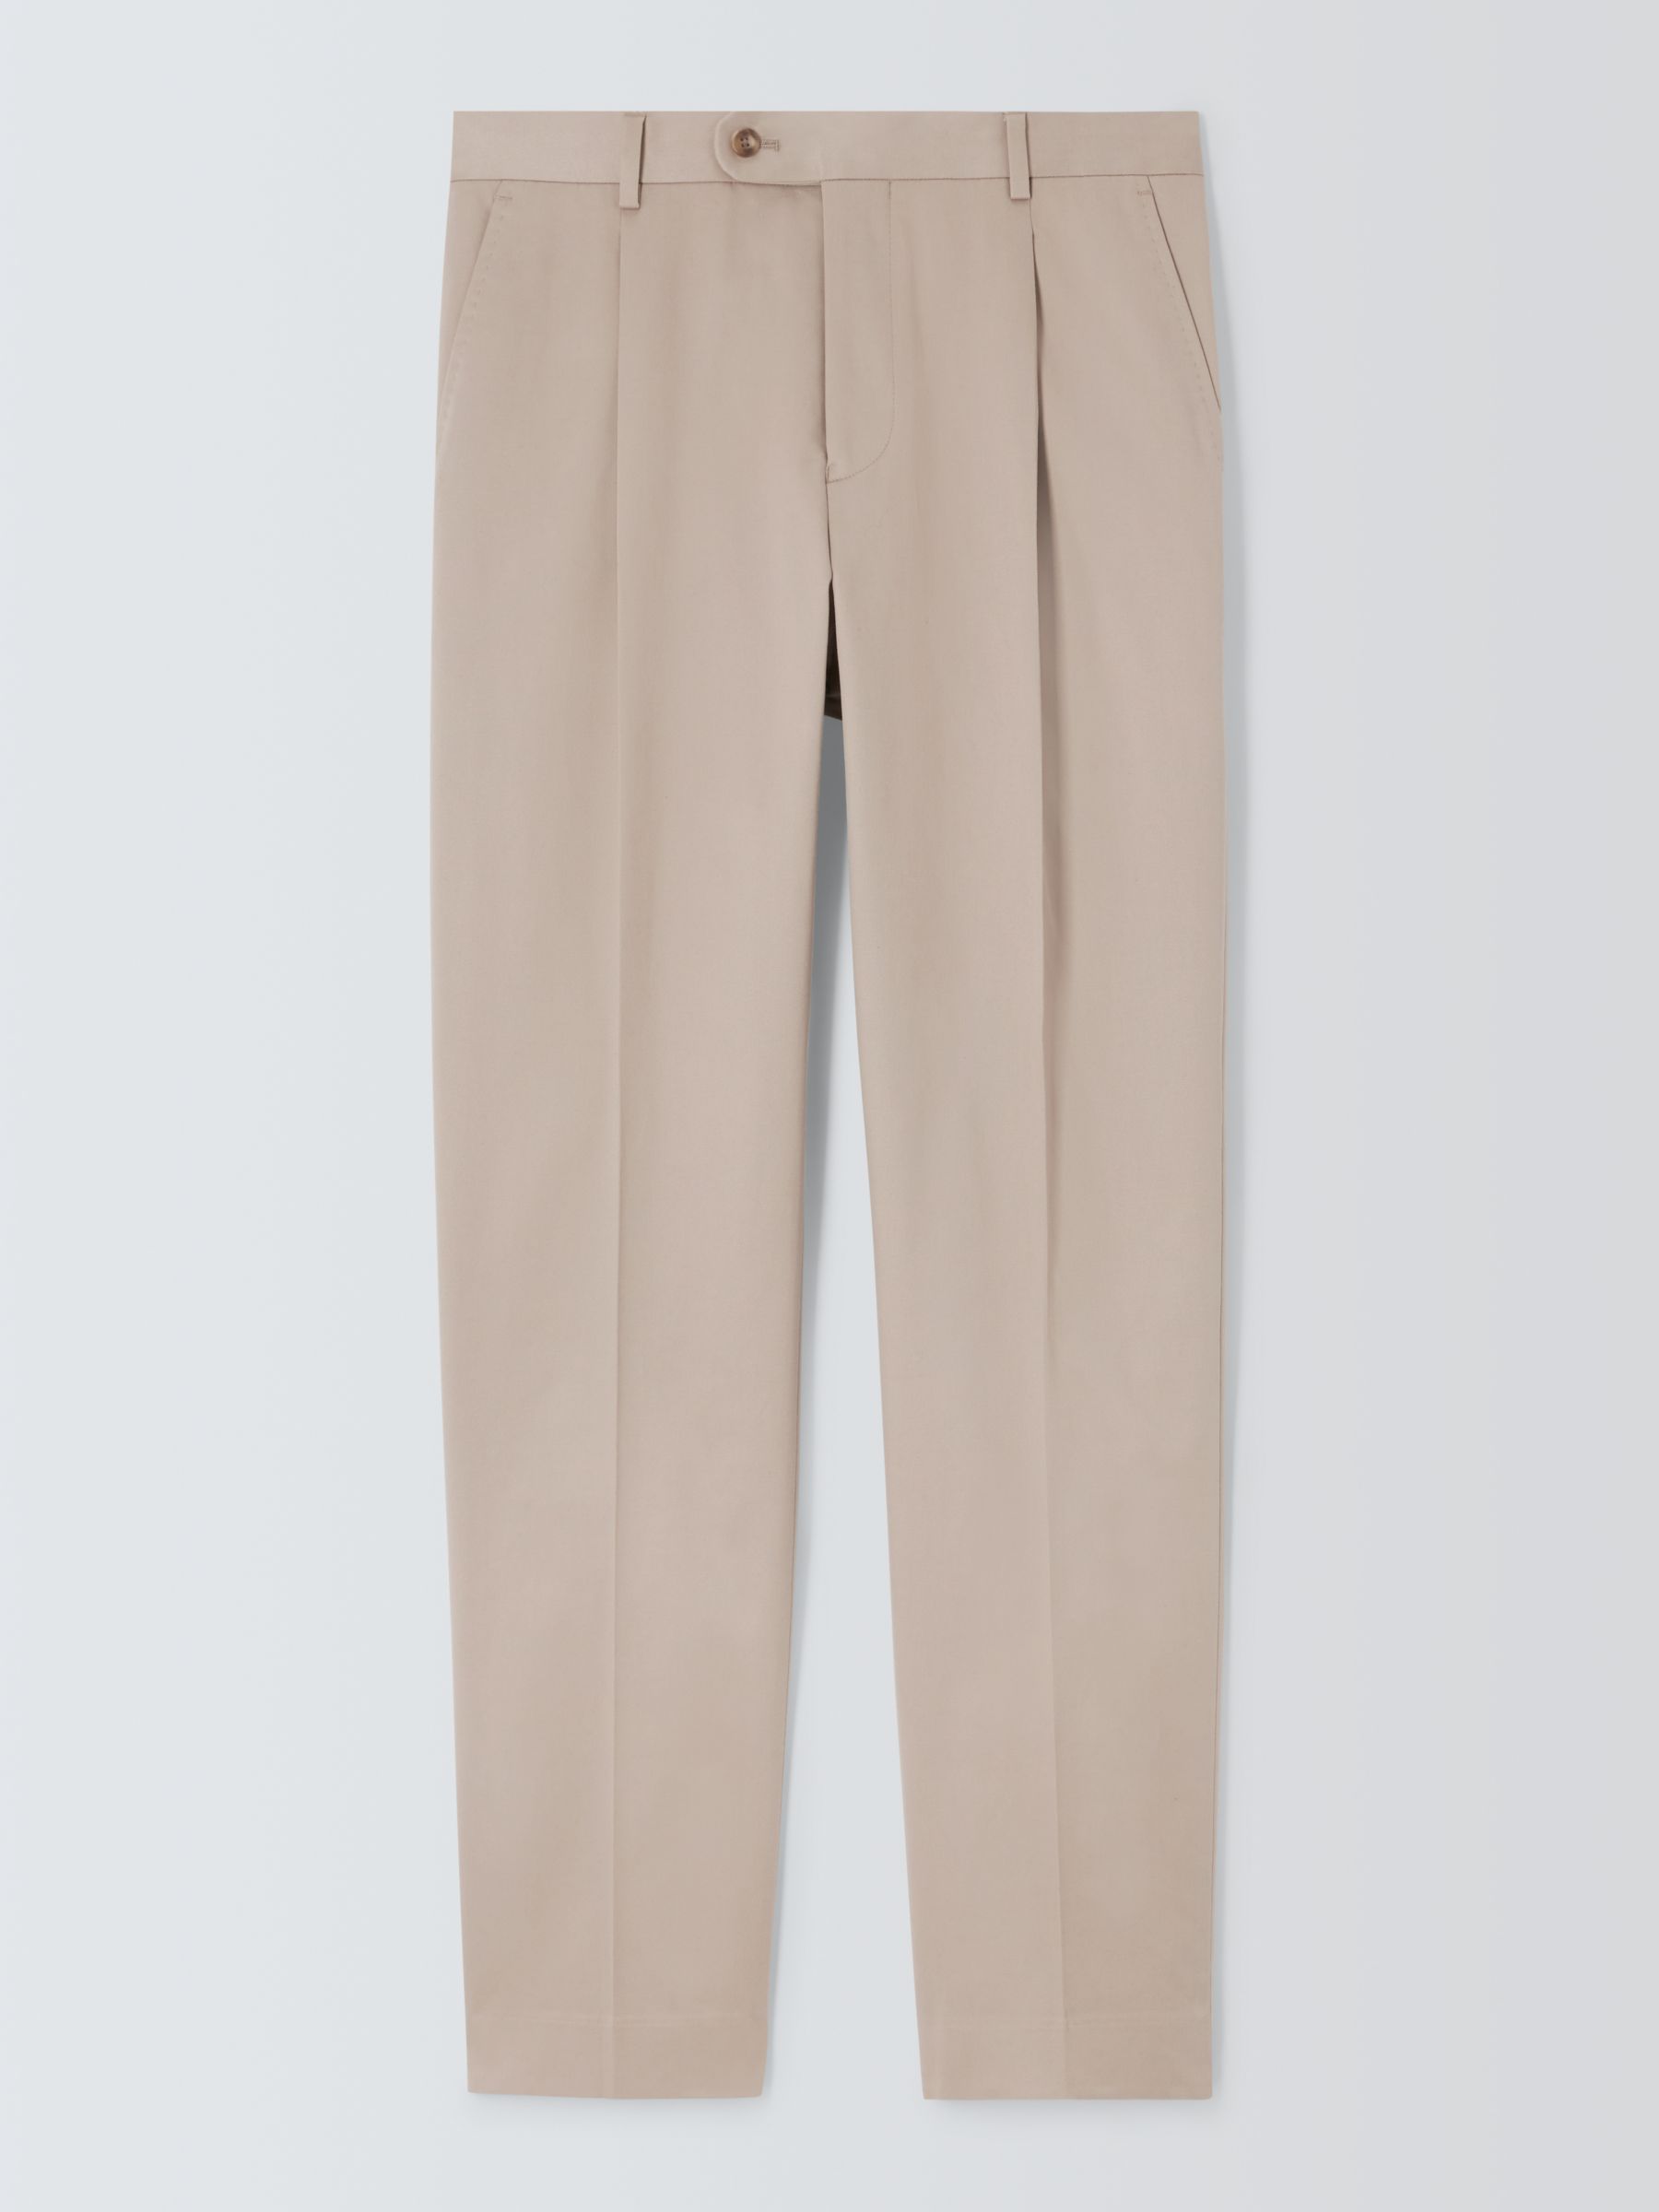 John Lewis Dulwich Cotton Smart Pleat Front Chinos, Stone, 42R